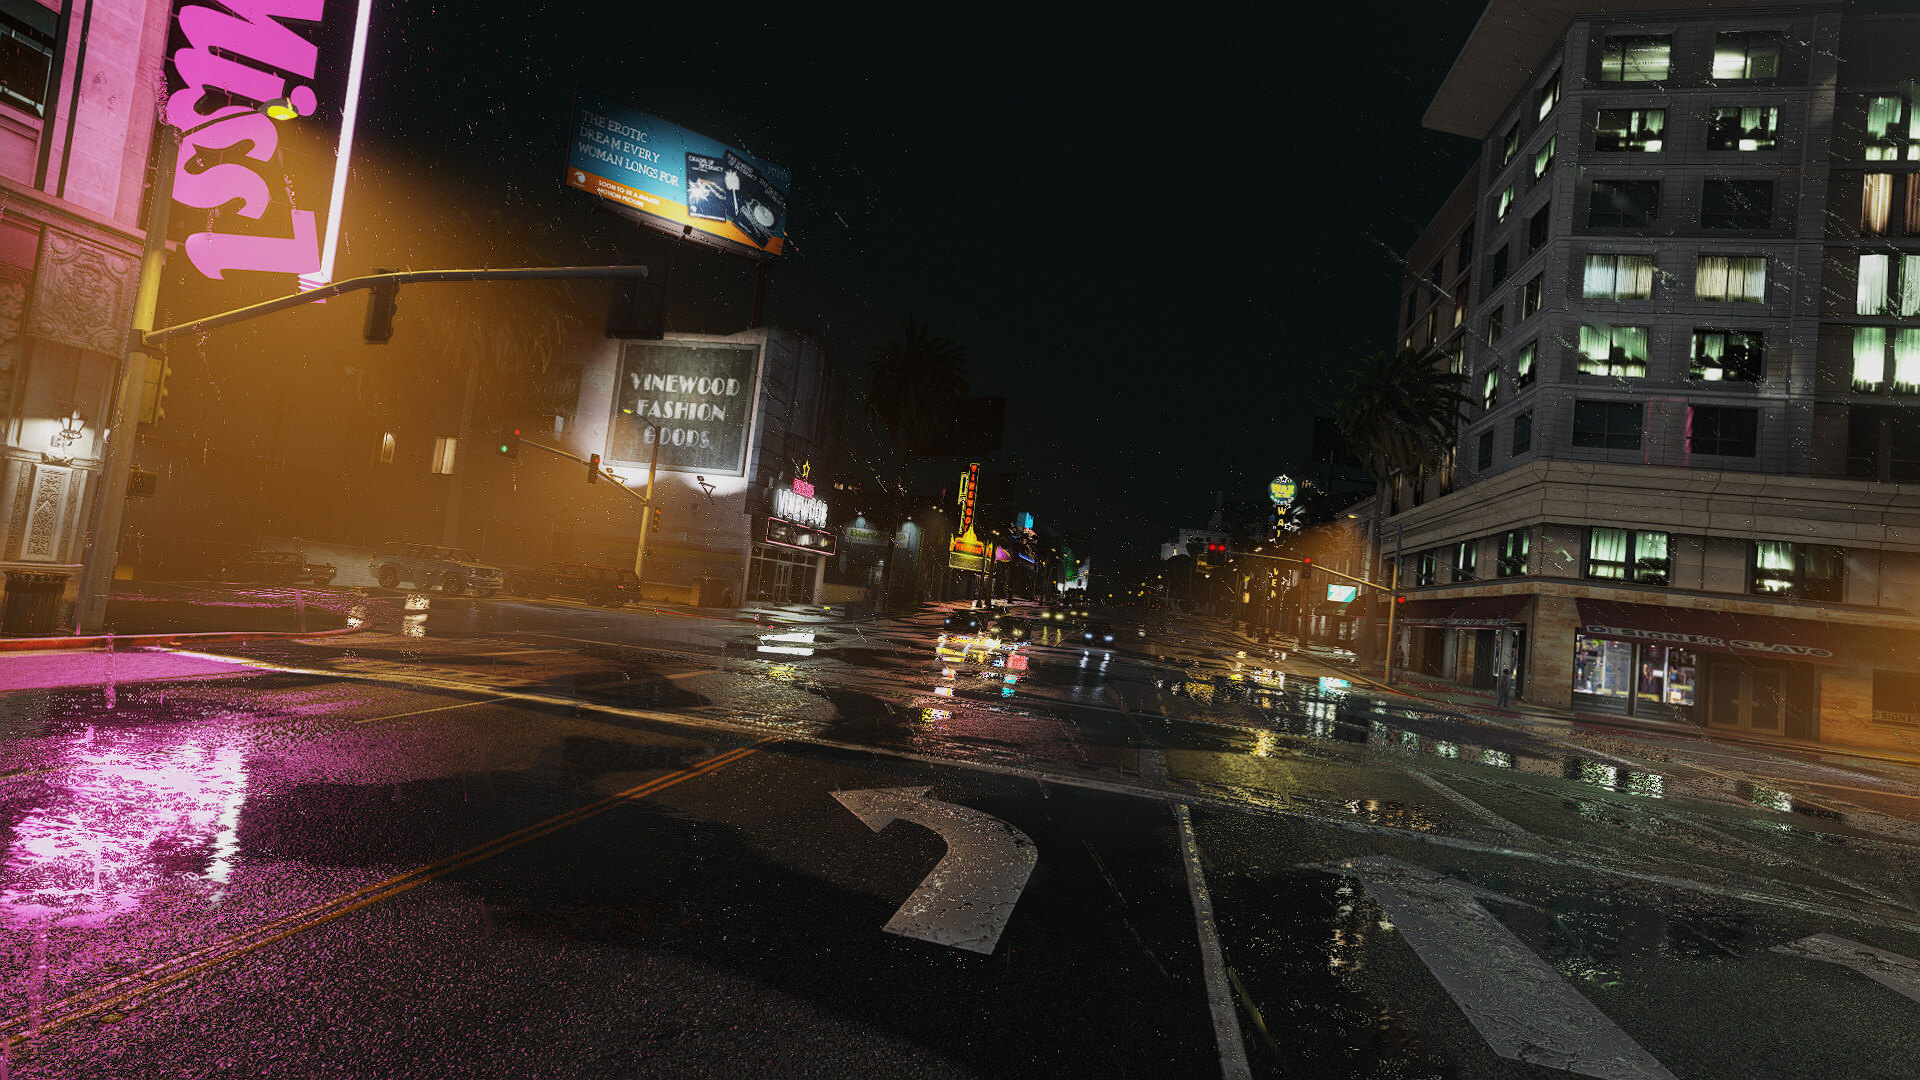 Is it real, or is it 'GTA V'? A trippy travelogue on the streets